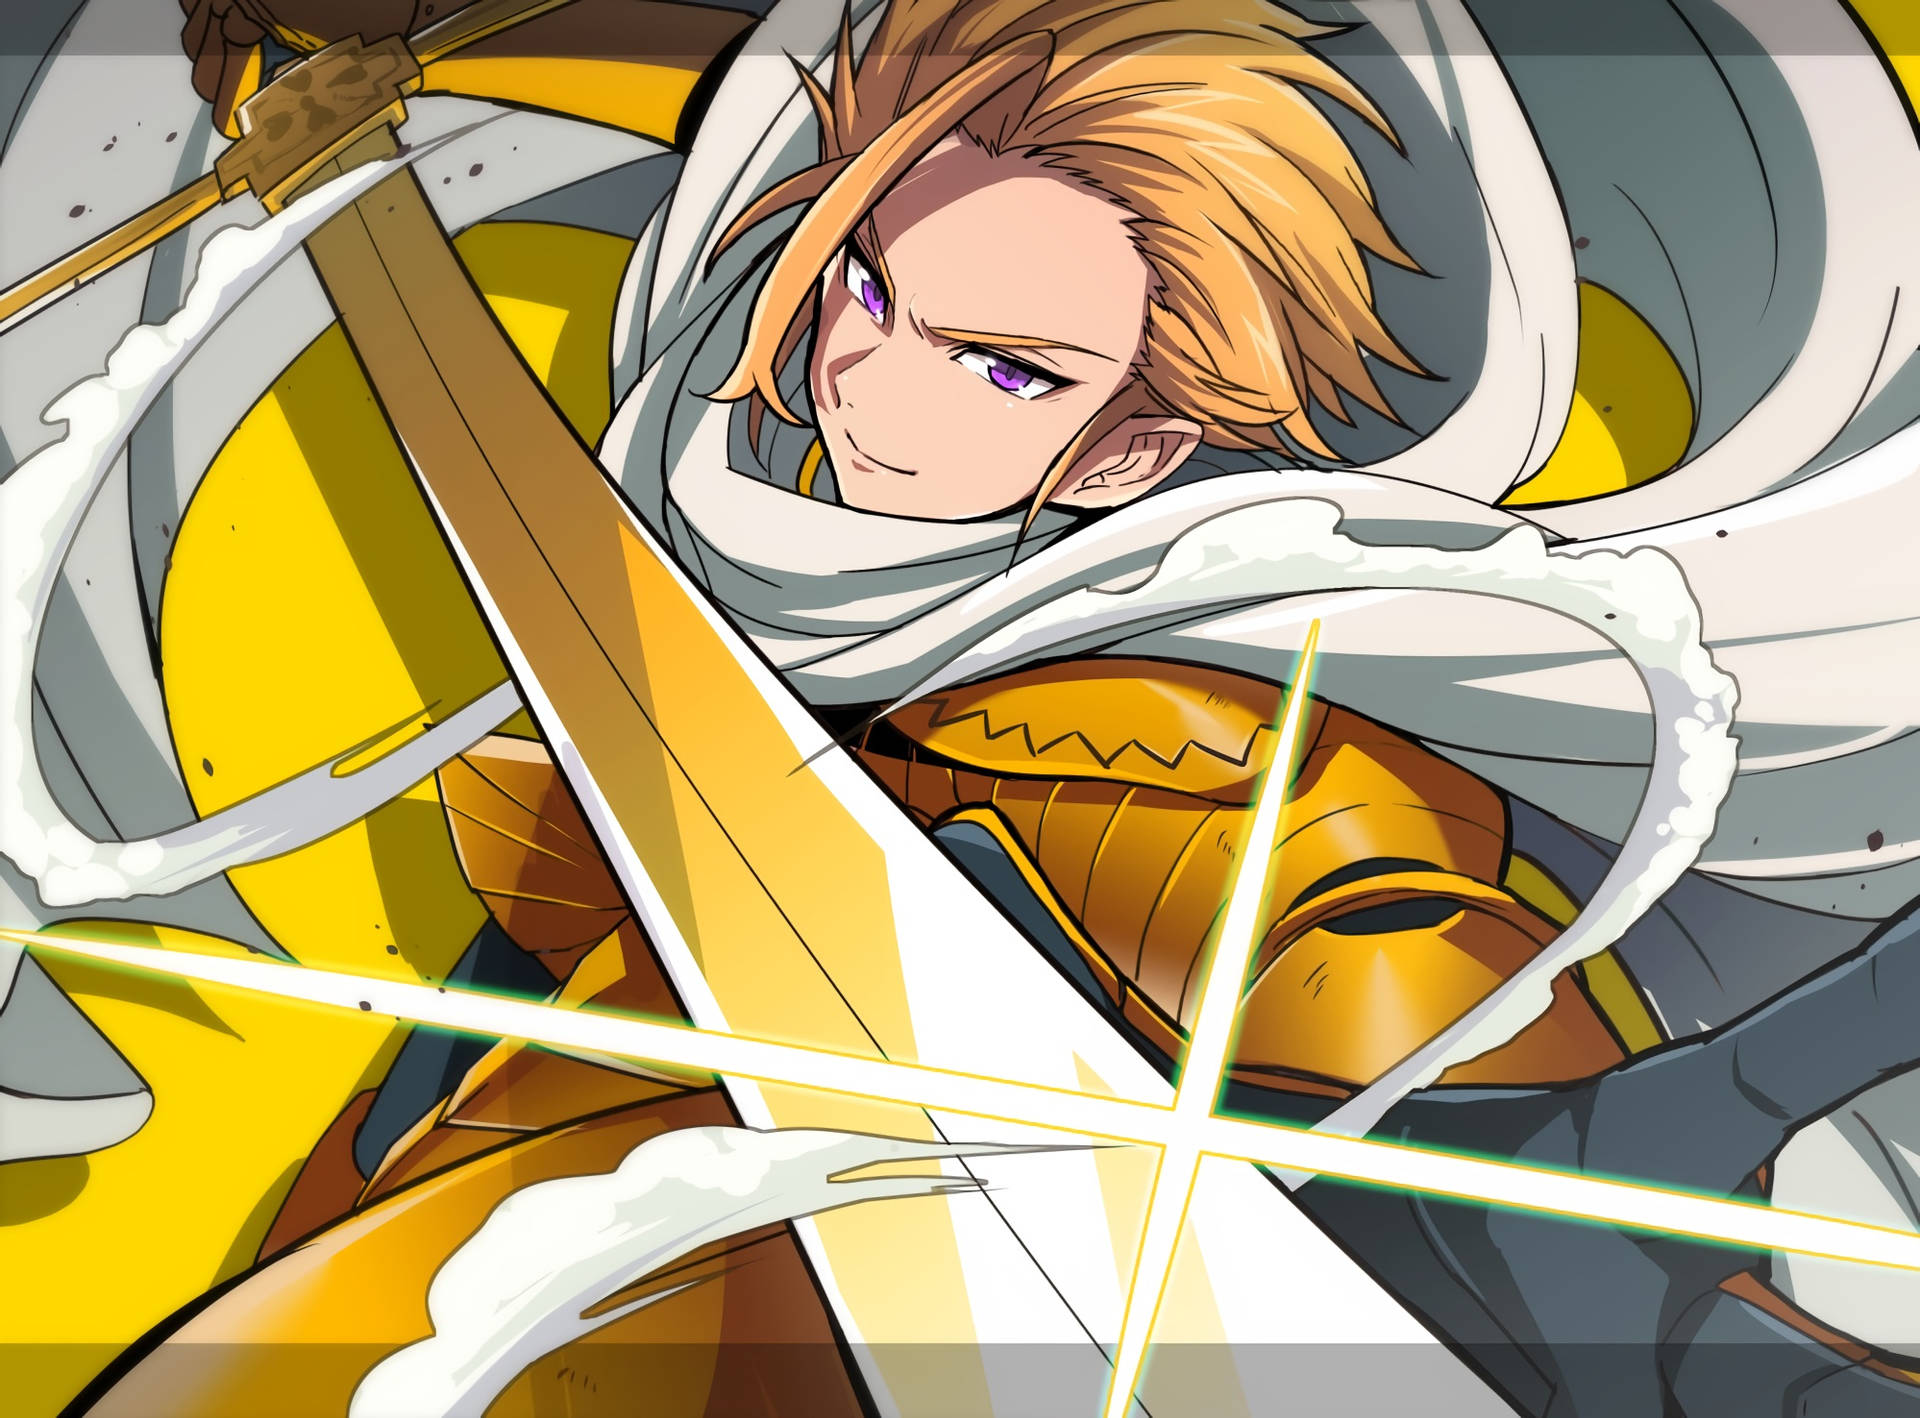 Fight the Seven Deadly Sins with King Arthur's Knights of the Round Table Wallpaper